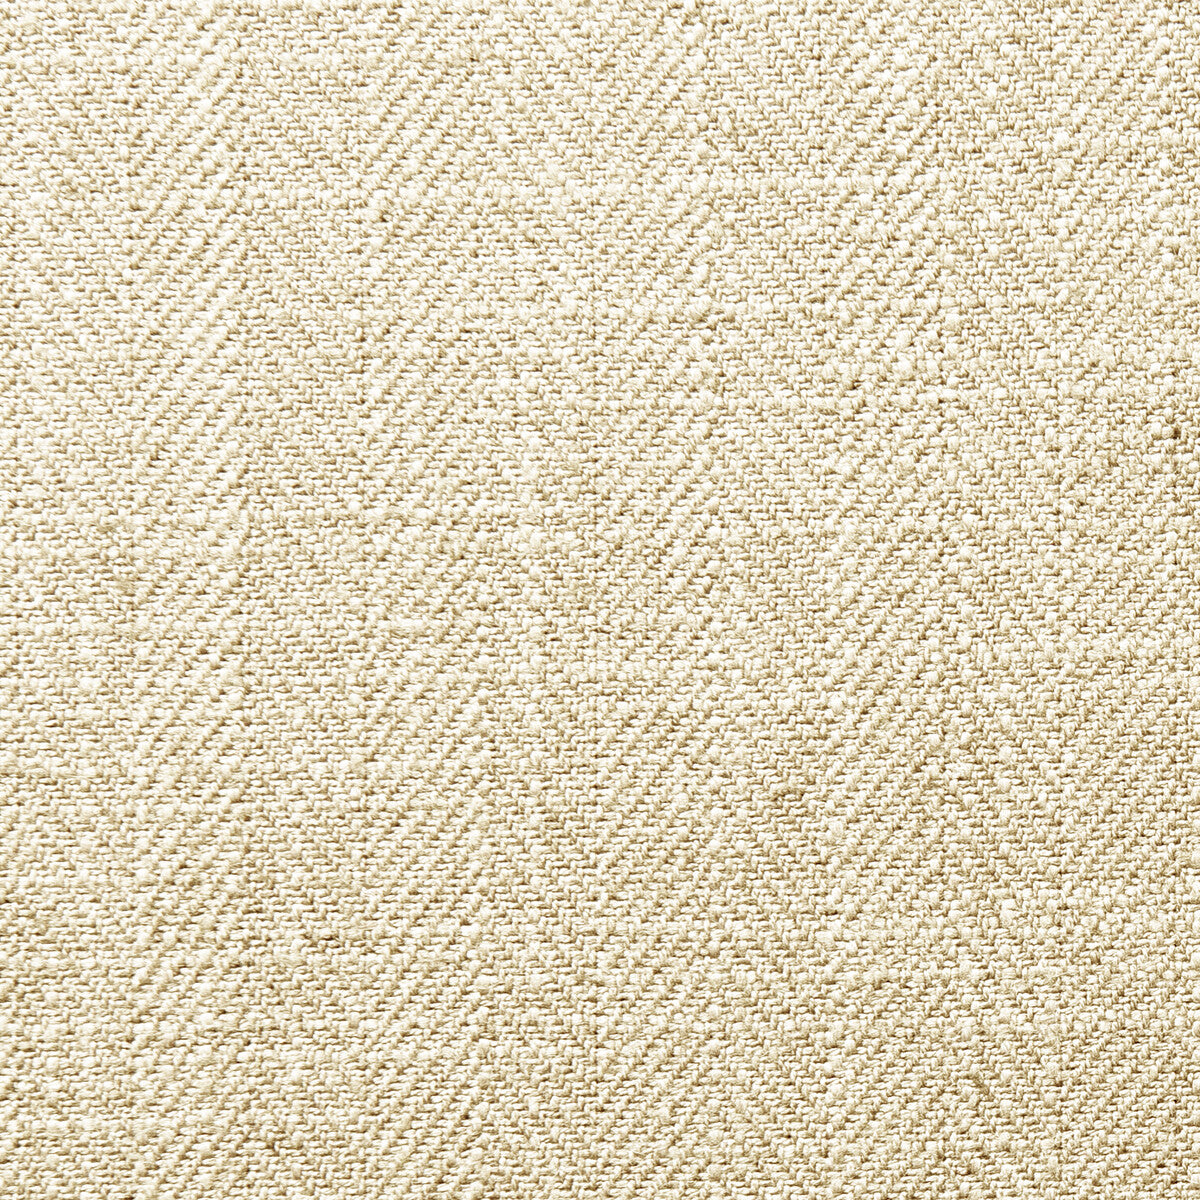 Henley fabric in flax color - pattern F0648/14.CAC.0 - by Clarke And Clarke in the Clarke &amp; Clarke Henley collection